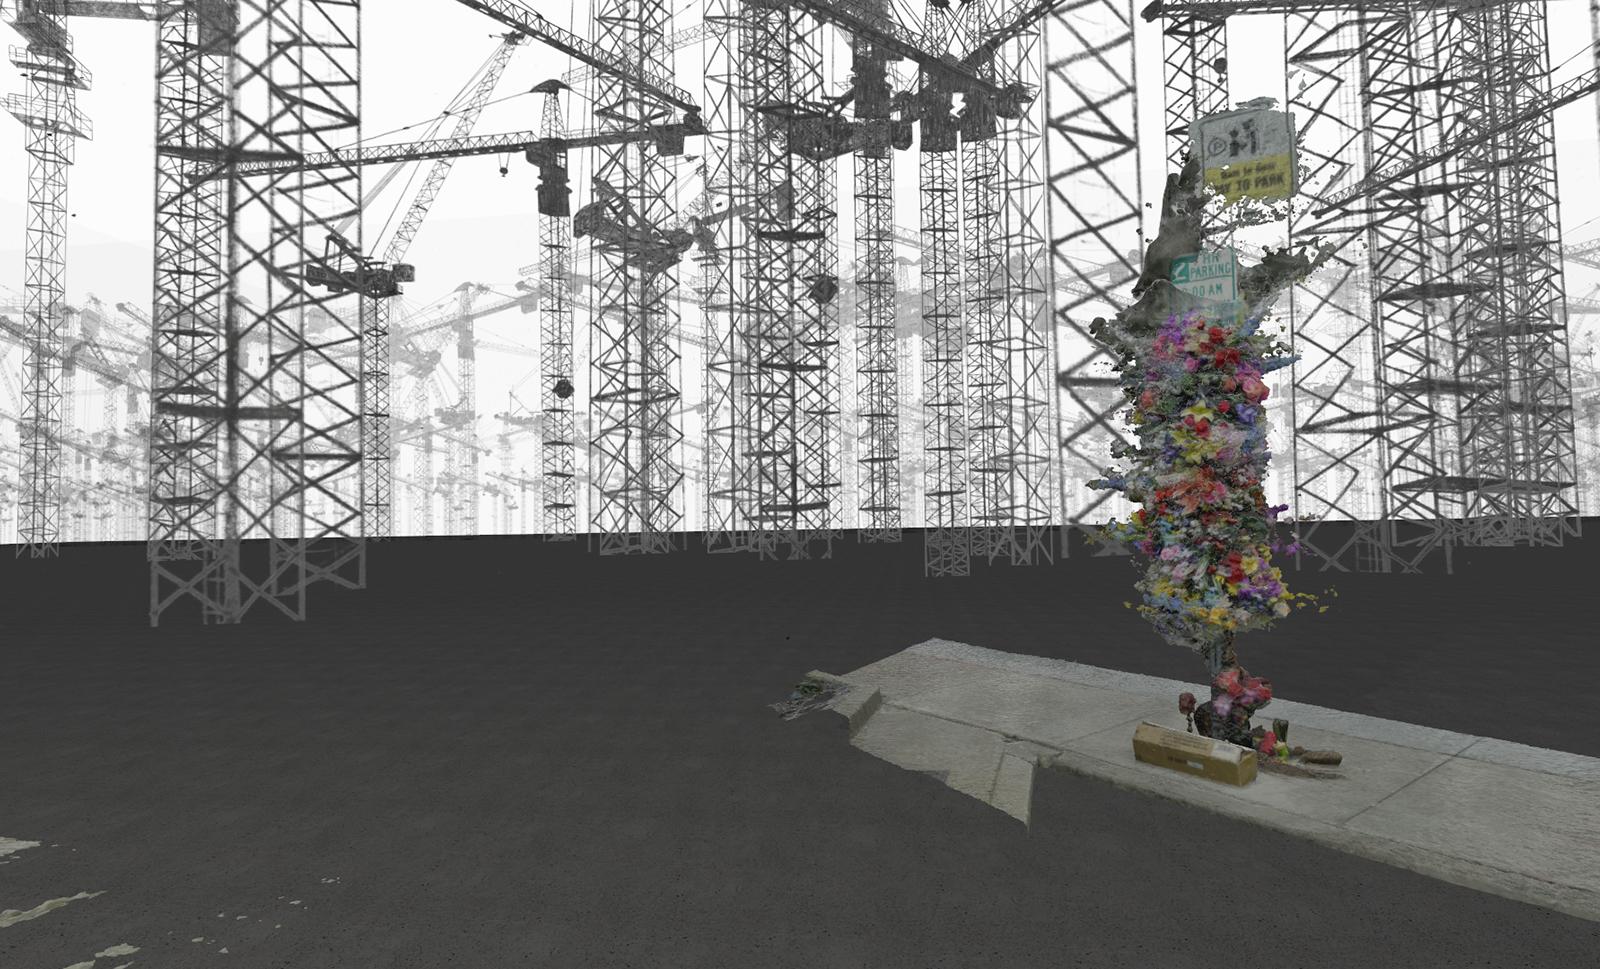 A virtual reality world in a landscape surrounded by cranes, in the foreground is a street sign covered with flowers 